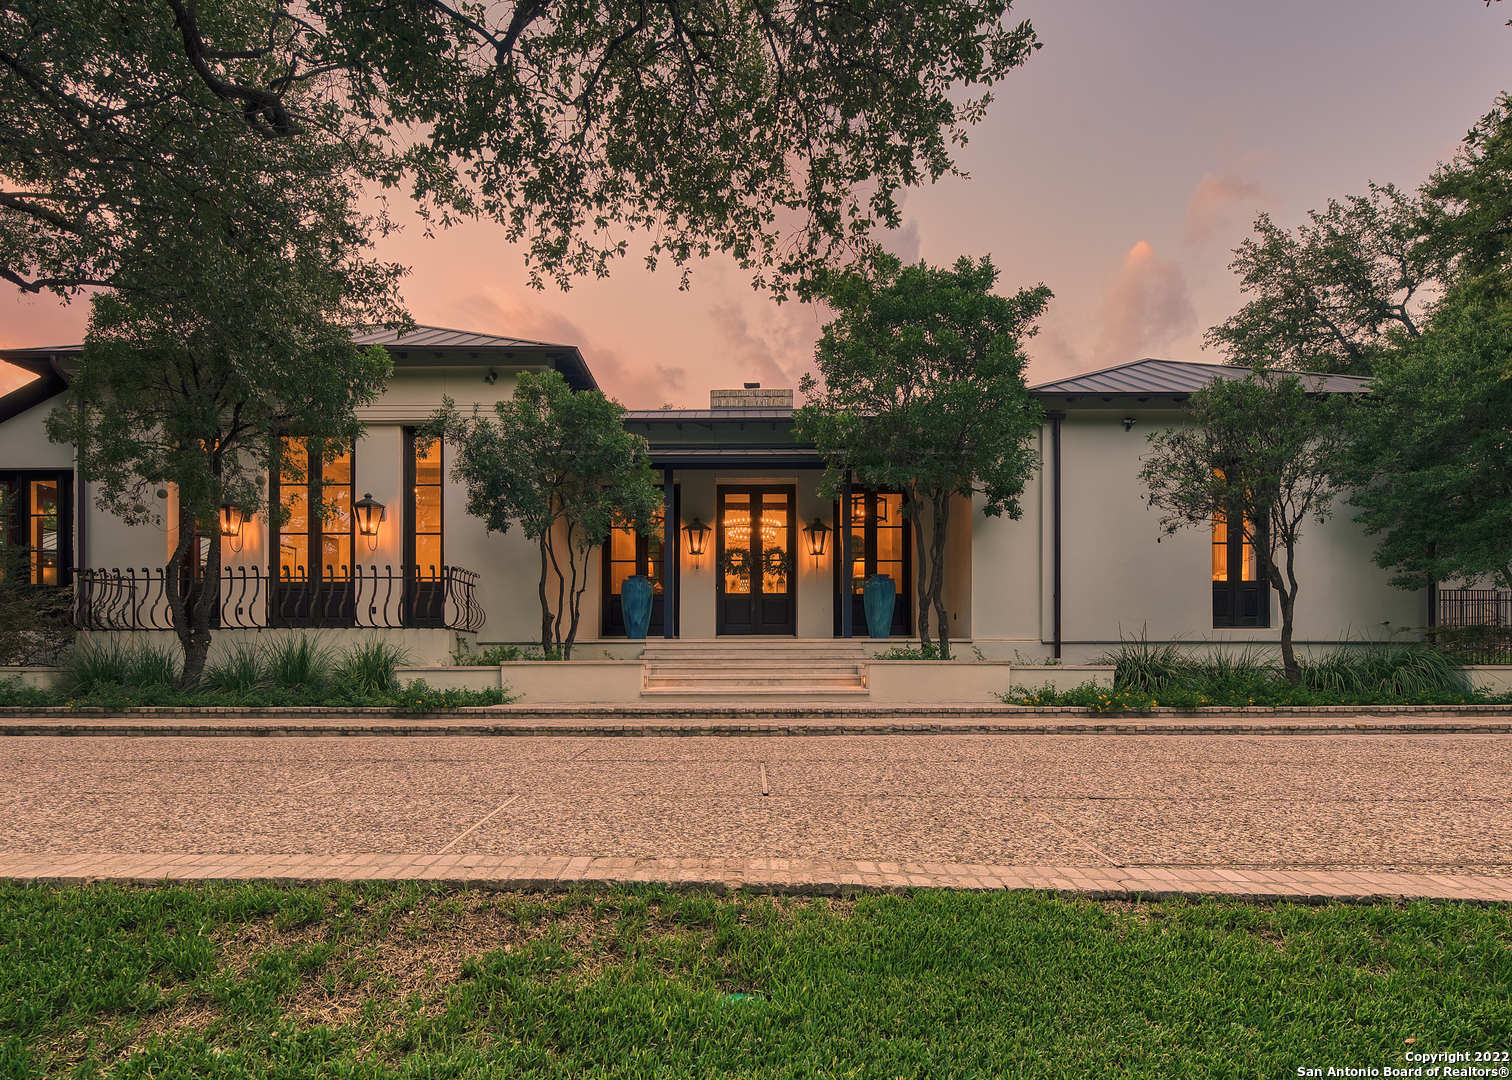 Secluded in a parklike setting on just over an acre, this stunning Contemporary Mediterranean showpiece perfectly exemplifies the luxurious privacy and convenience. Designed by renowned architect Don B. McDonald, the home is graced by a spacious open living room, gourmet island kitchen, spa-like primary suite and a private library with a hidden room. The current owner, one of San Antonio's best designers, has refreshed and reimagined the space to the last detail, including bespoke copper lighting, imported materials & restored antique hardware. The outdoor entertaining area showcases a fully fenced pool, infinity edge spa, covered patio, fireplace & kitchen.